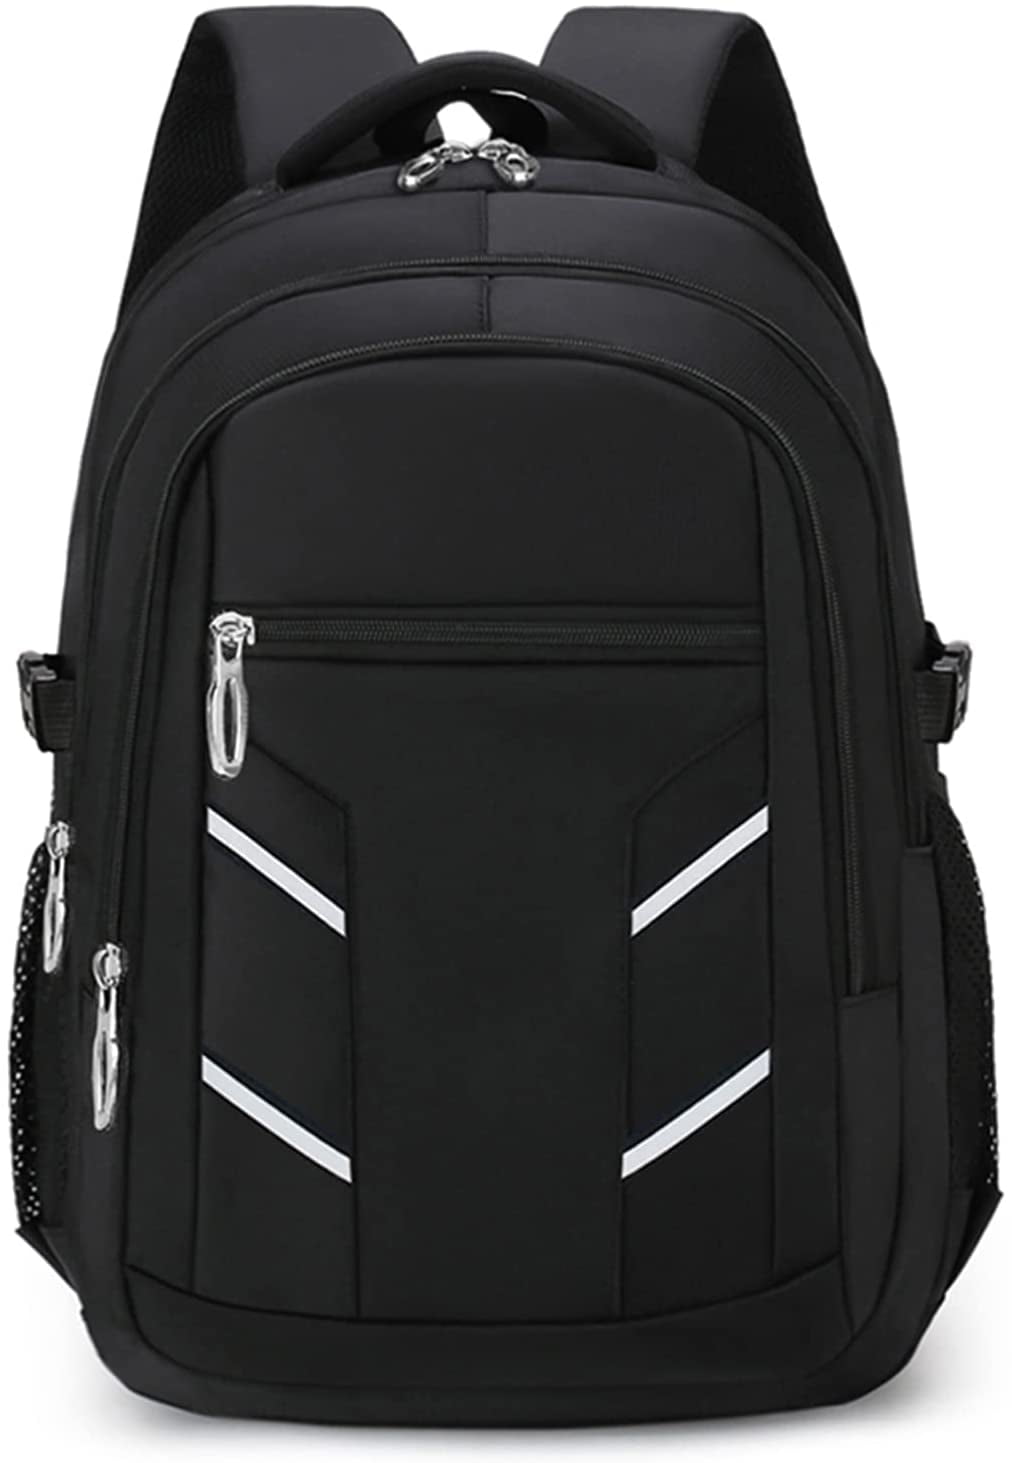 Laptop Backpack 15.6 17.3 College Business Travel Laptop Backpack by EASTERN TIME High School Backpack